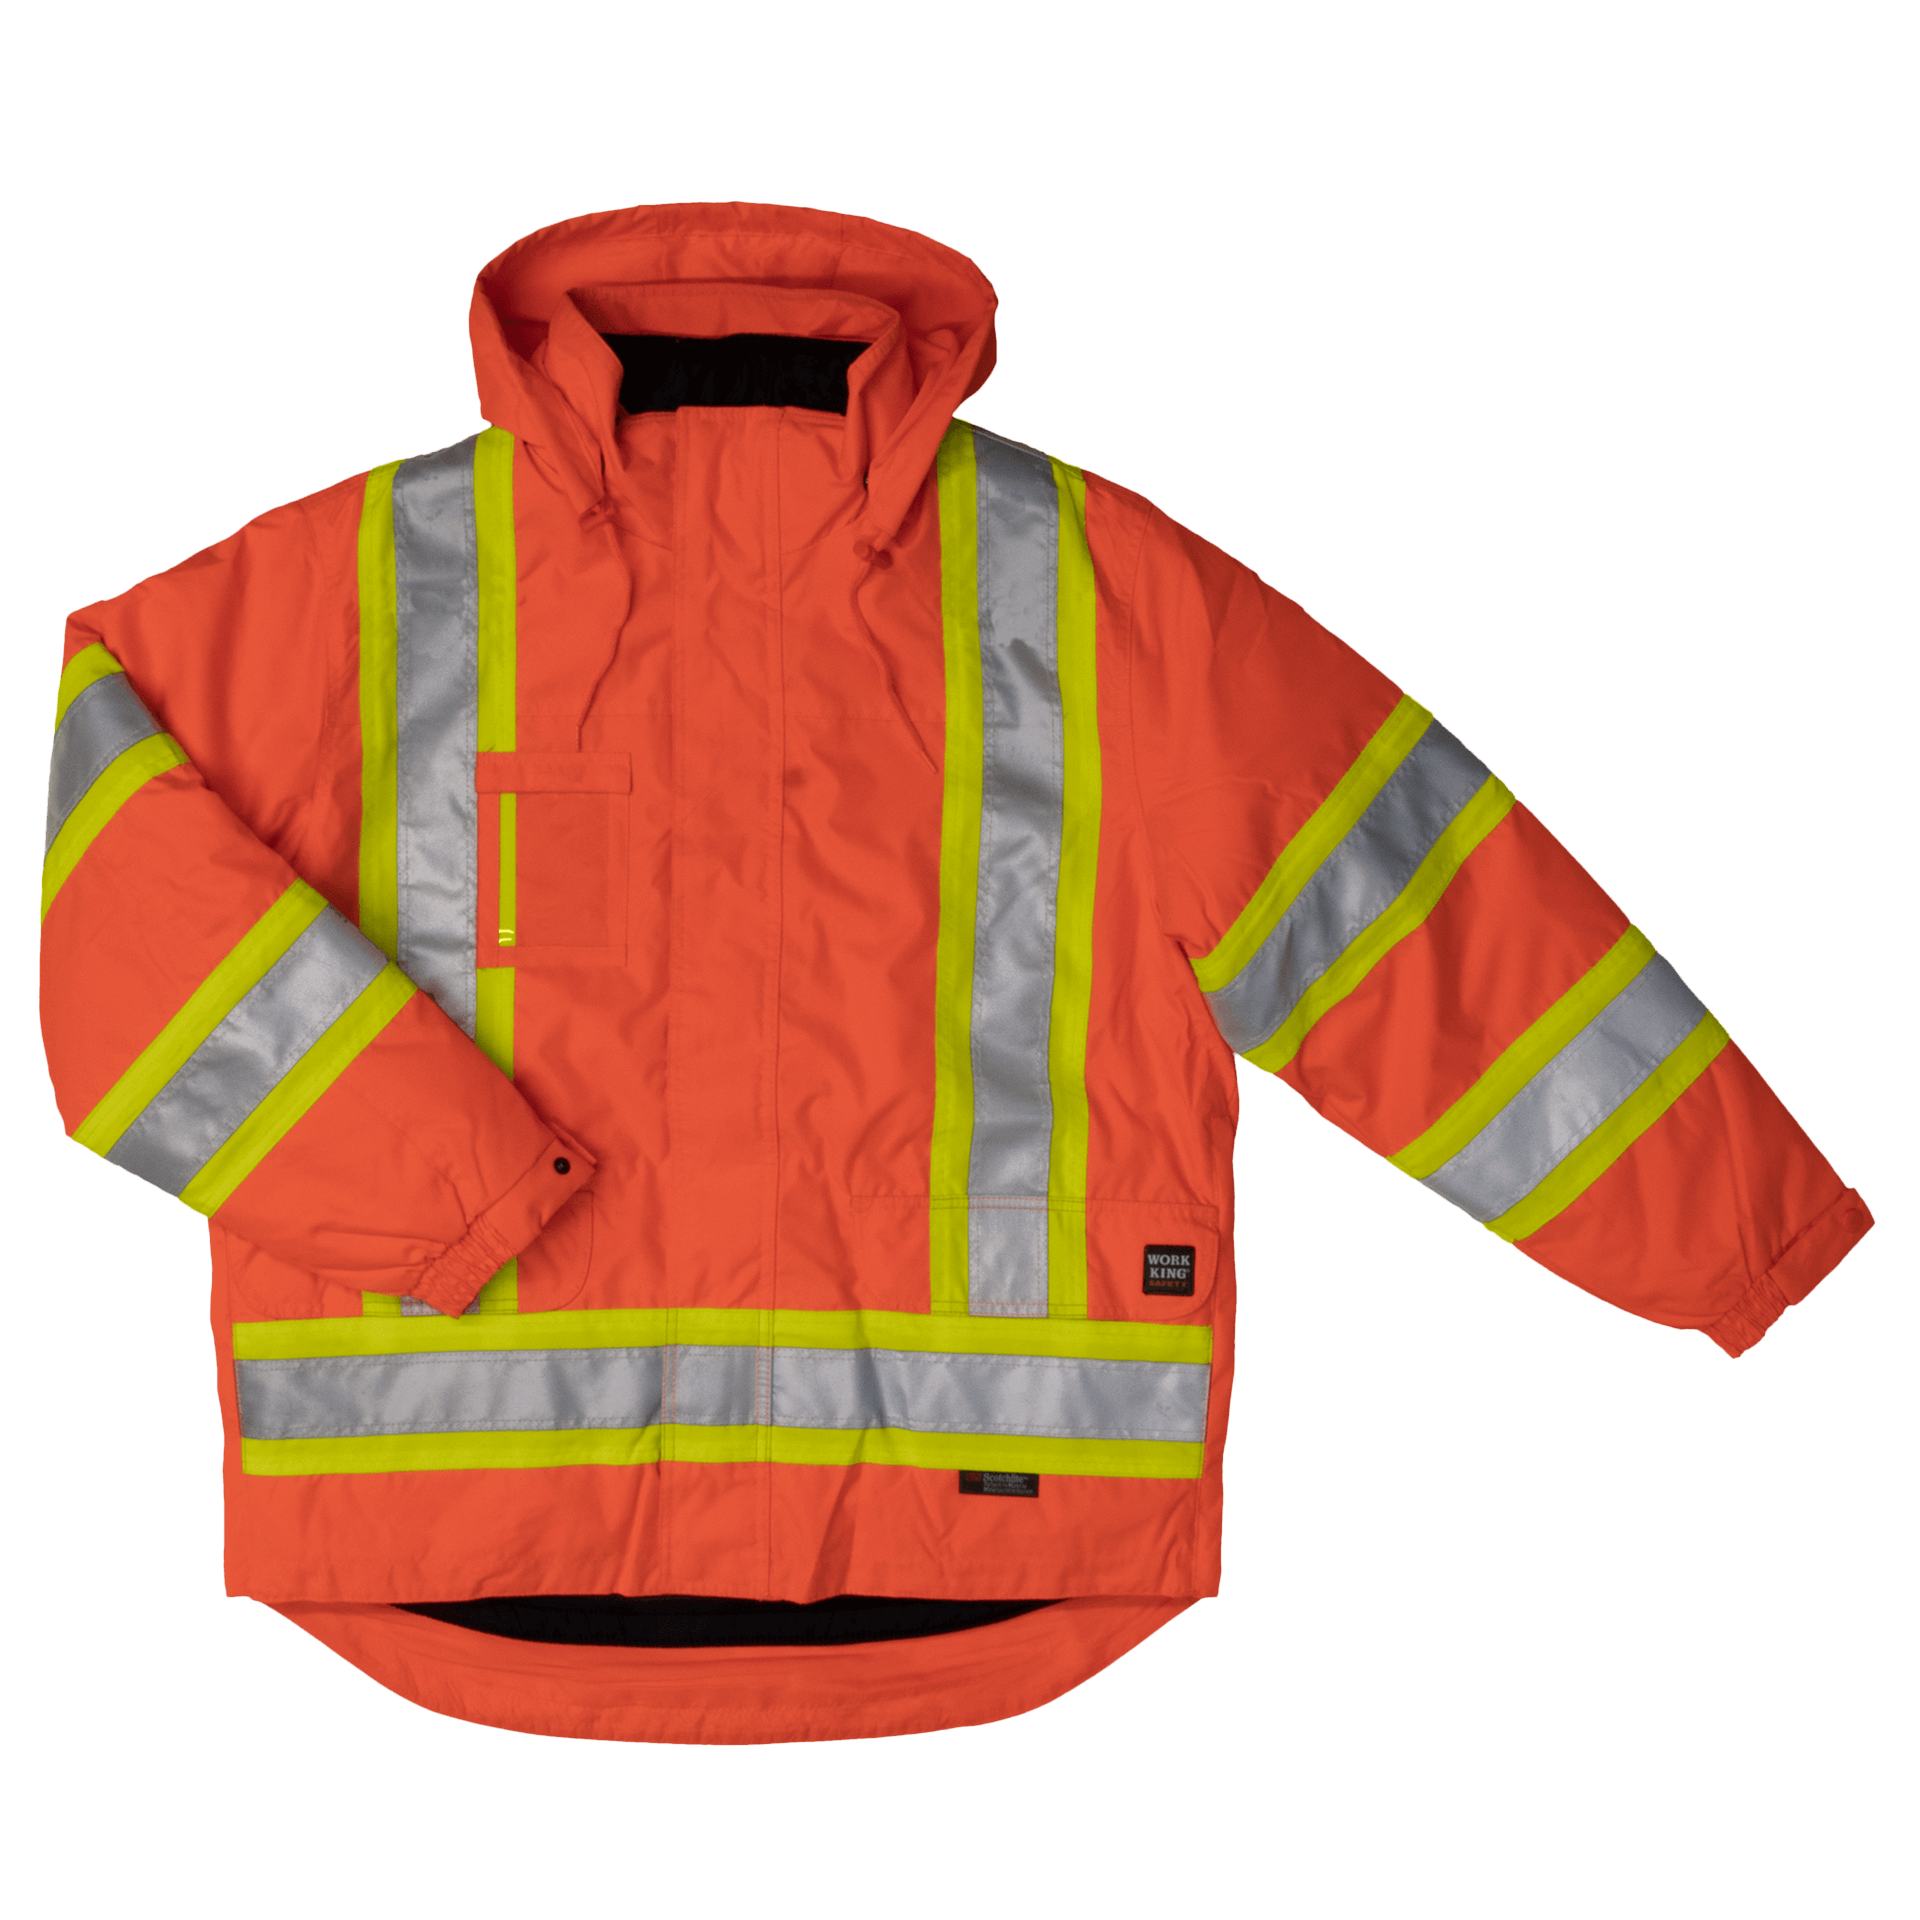 Tough Duck 5-in-1 Safety Jacket - S426 - Solid Orange